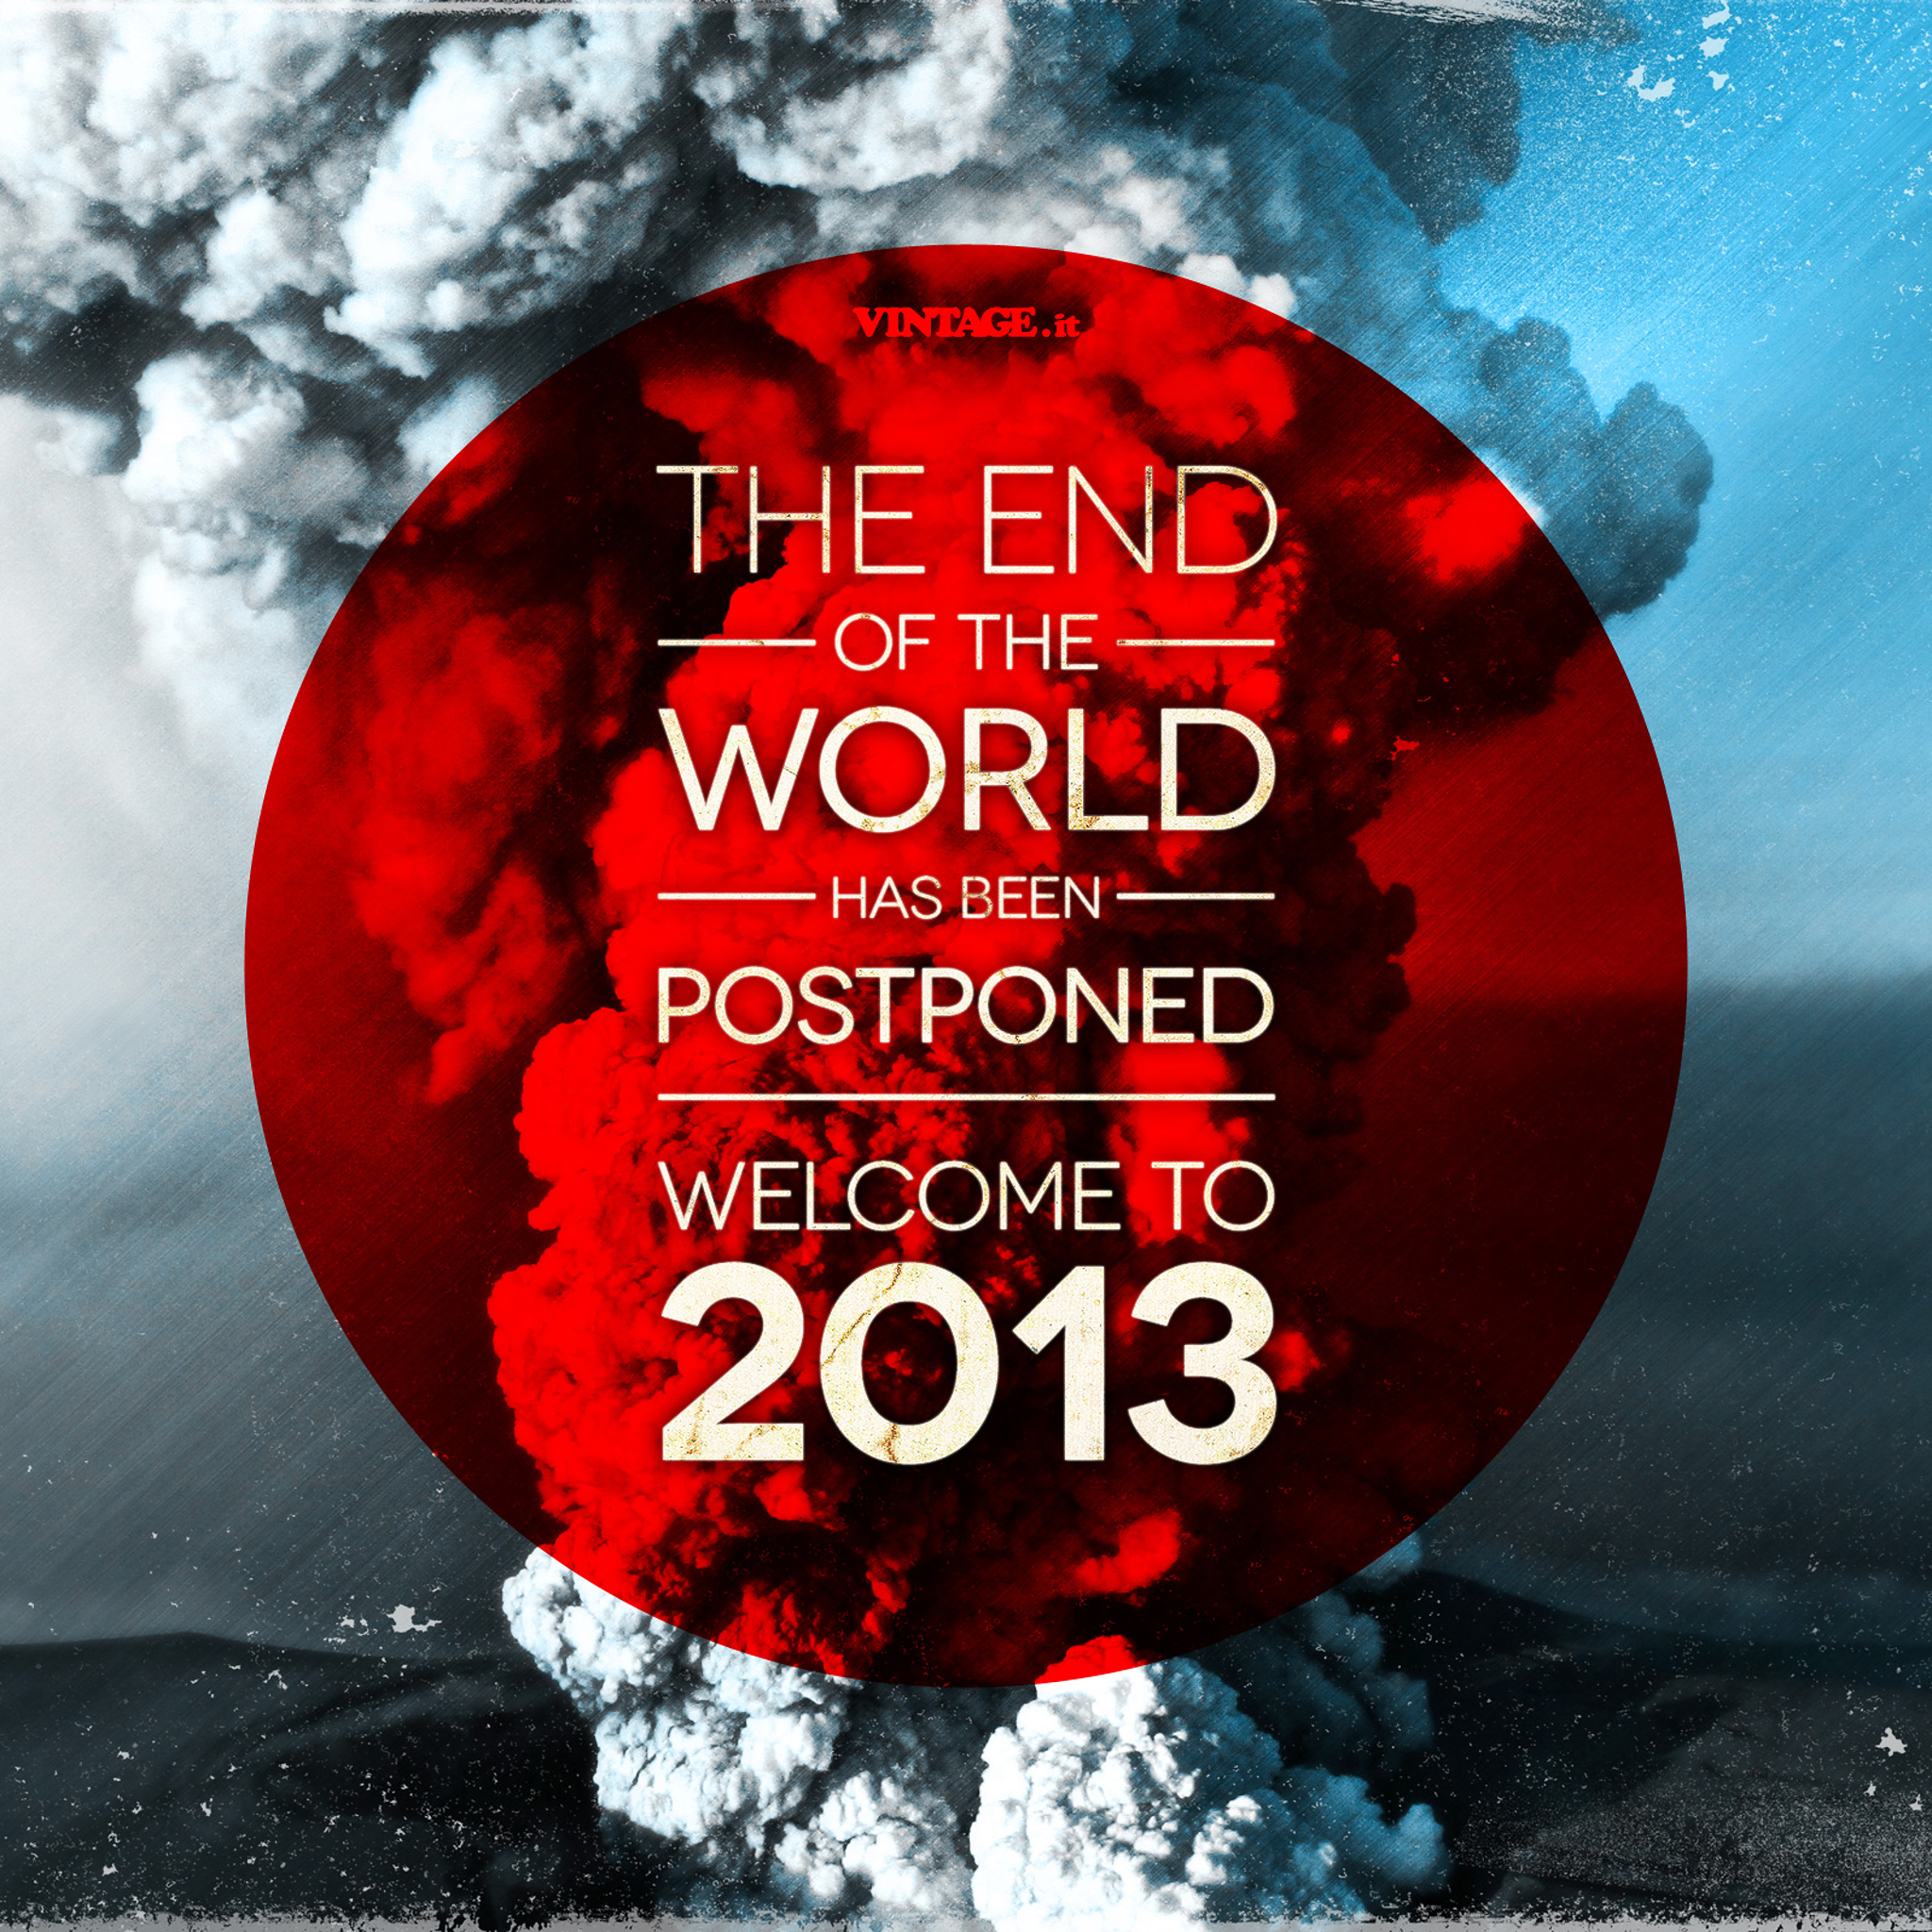 End Of The World - HD Wallpaper 